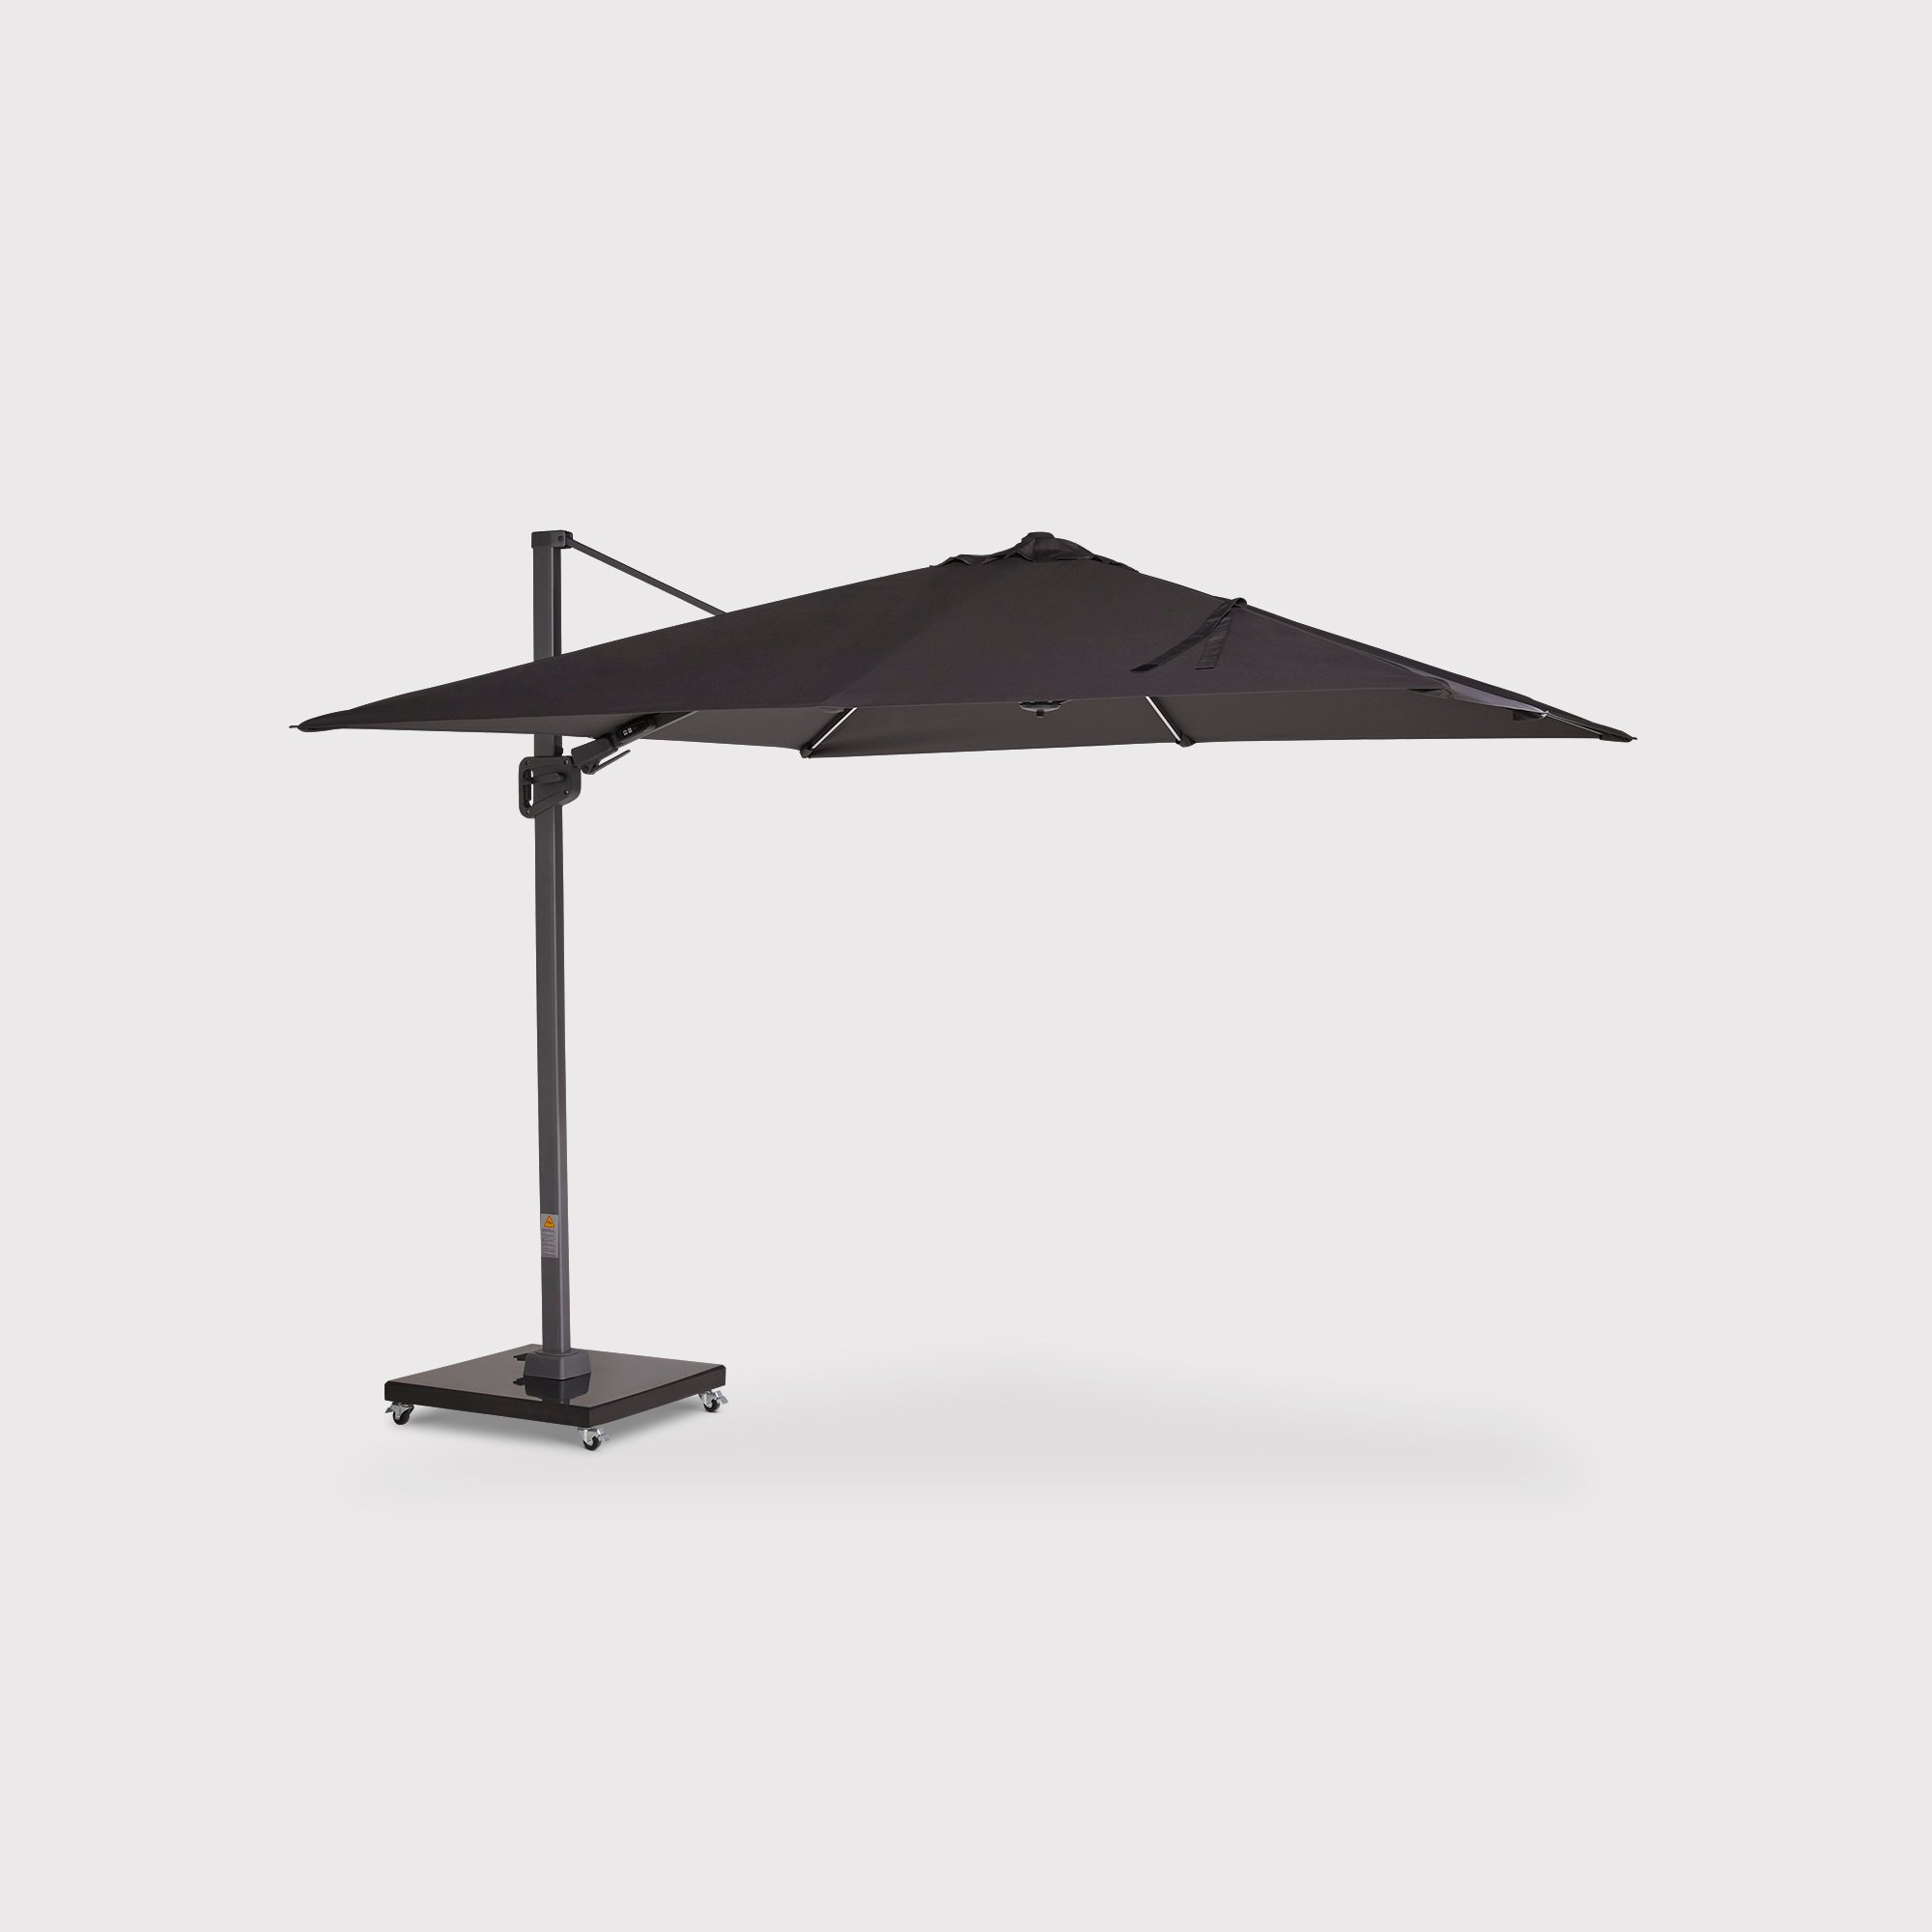 Lux Led Parasol & Base With Wheels, Grey | Barker & Stonehouse